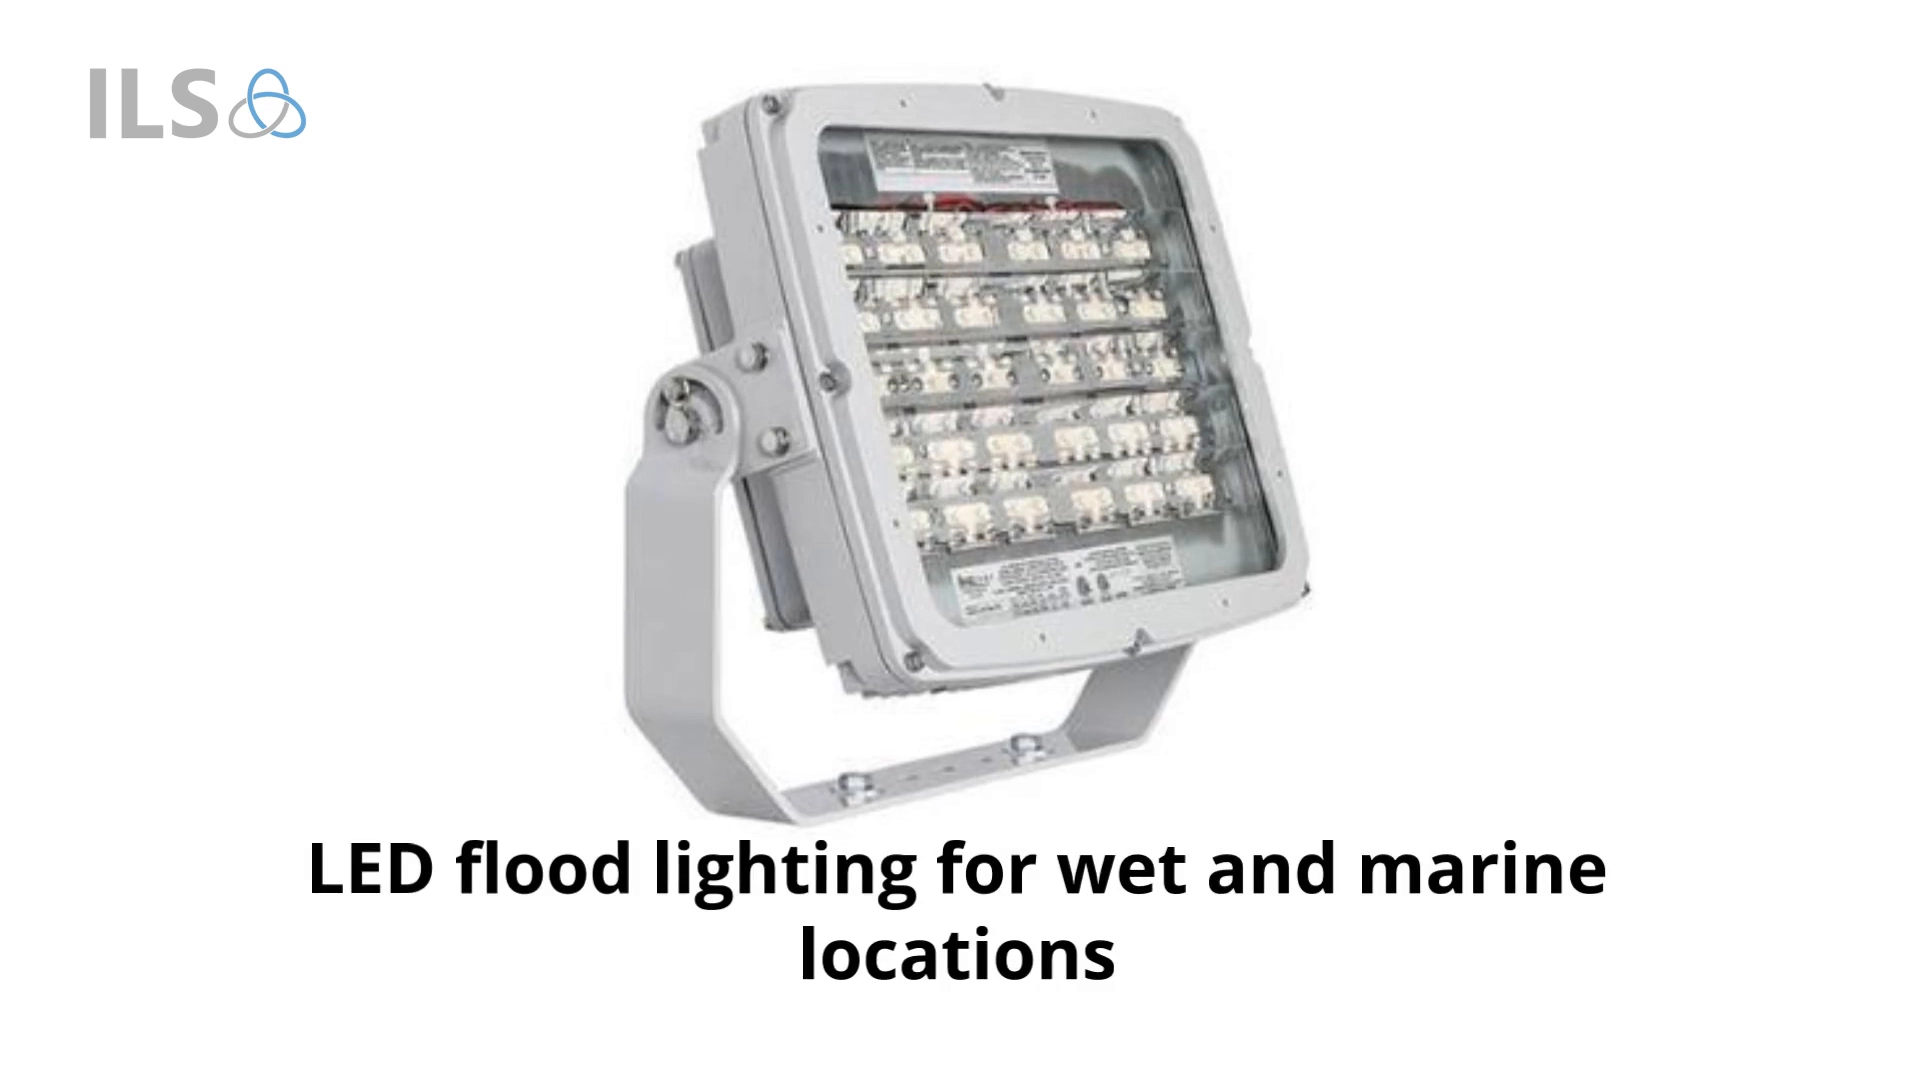 RIG-A-LITE’s LED Lighting Solutions are a Game-Changer for Industrial Safety